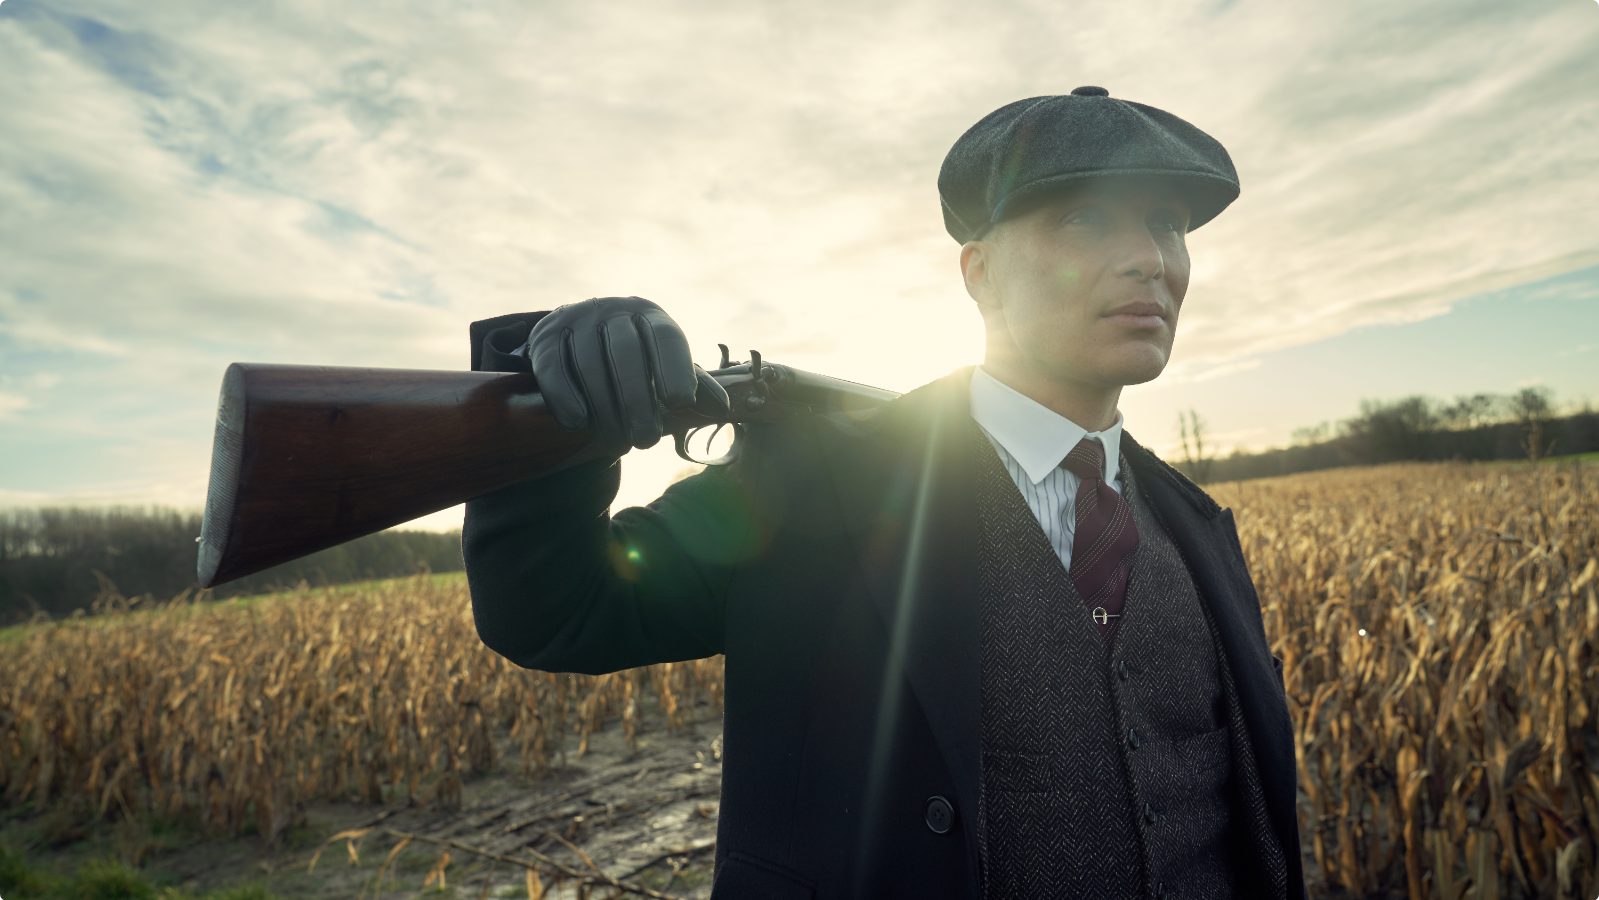 A man in vintage attire, including a flat cap, holds a shotgun over his shoulder, standing in a cornfield under a bright sky.